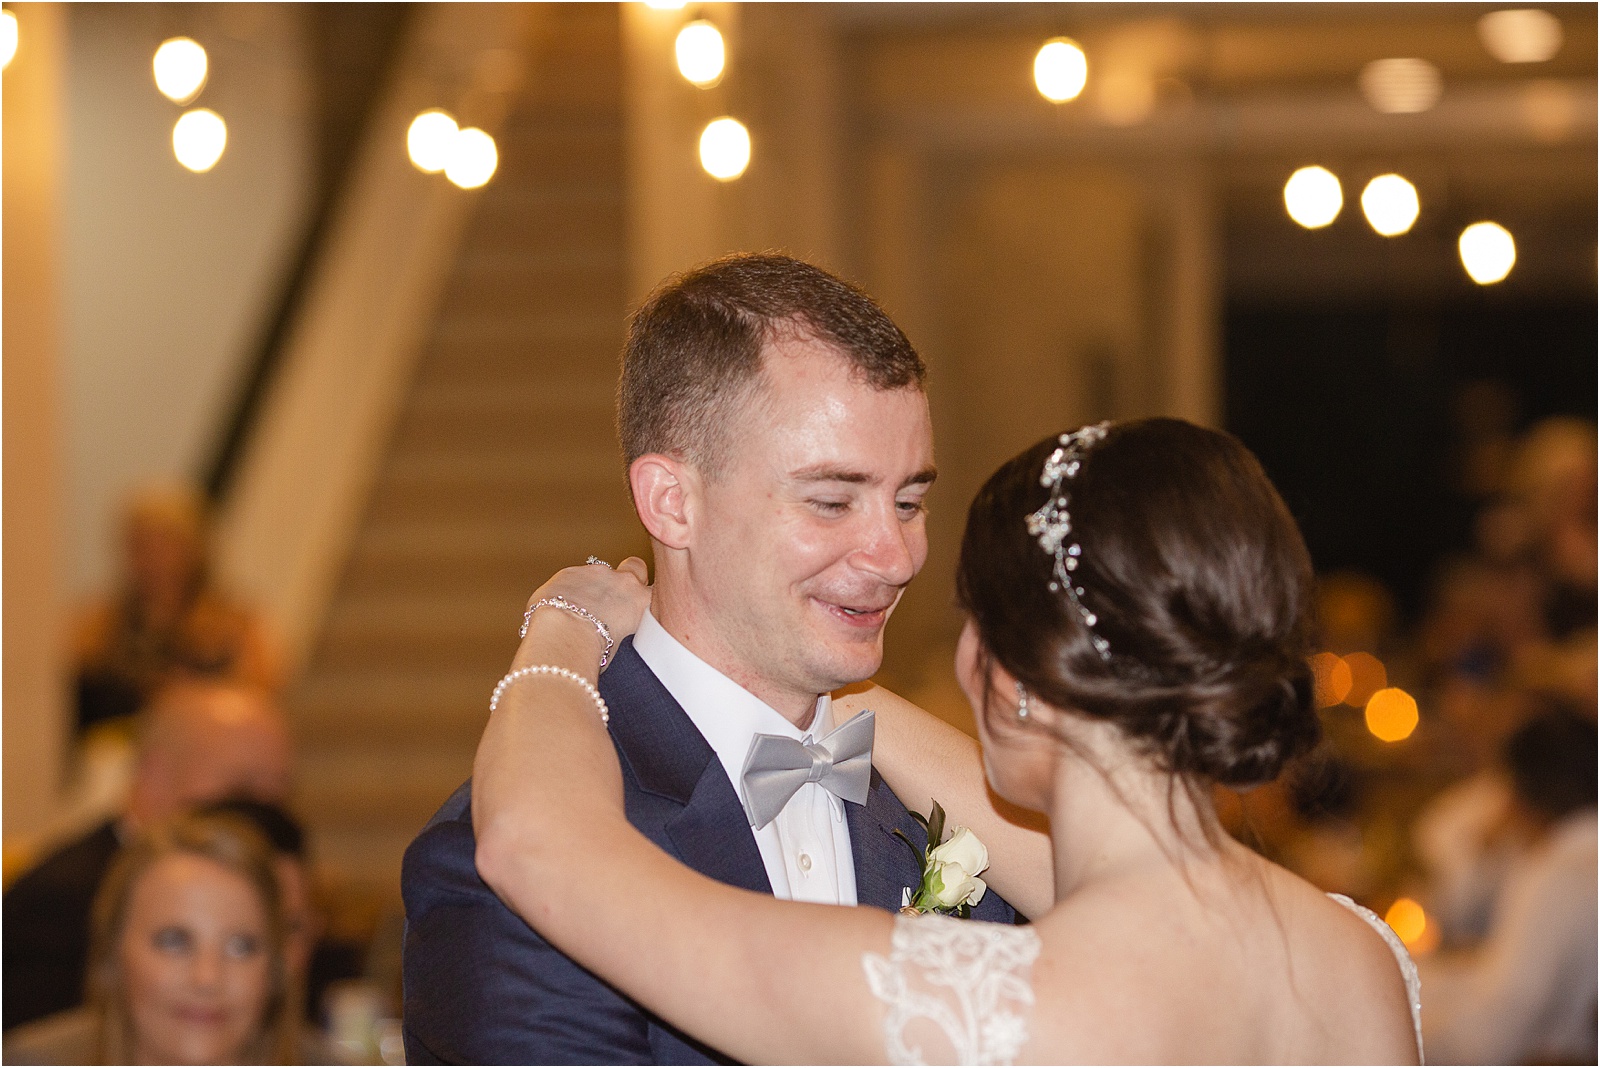 Groom talks to bride during their first dance as a married couple